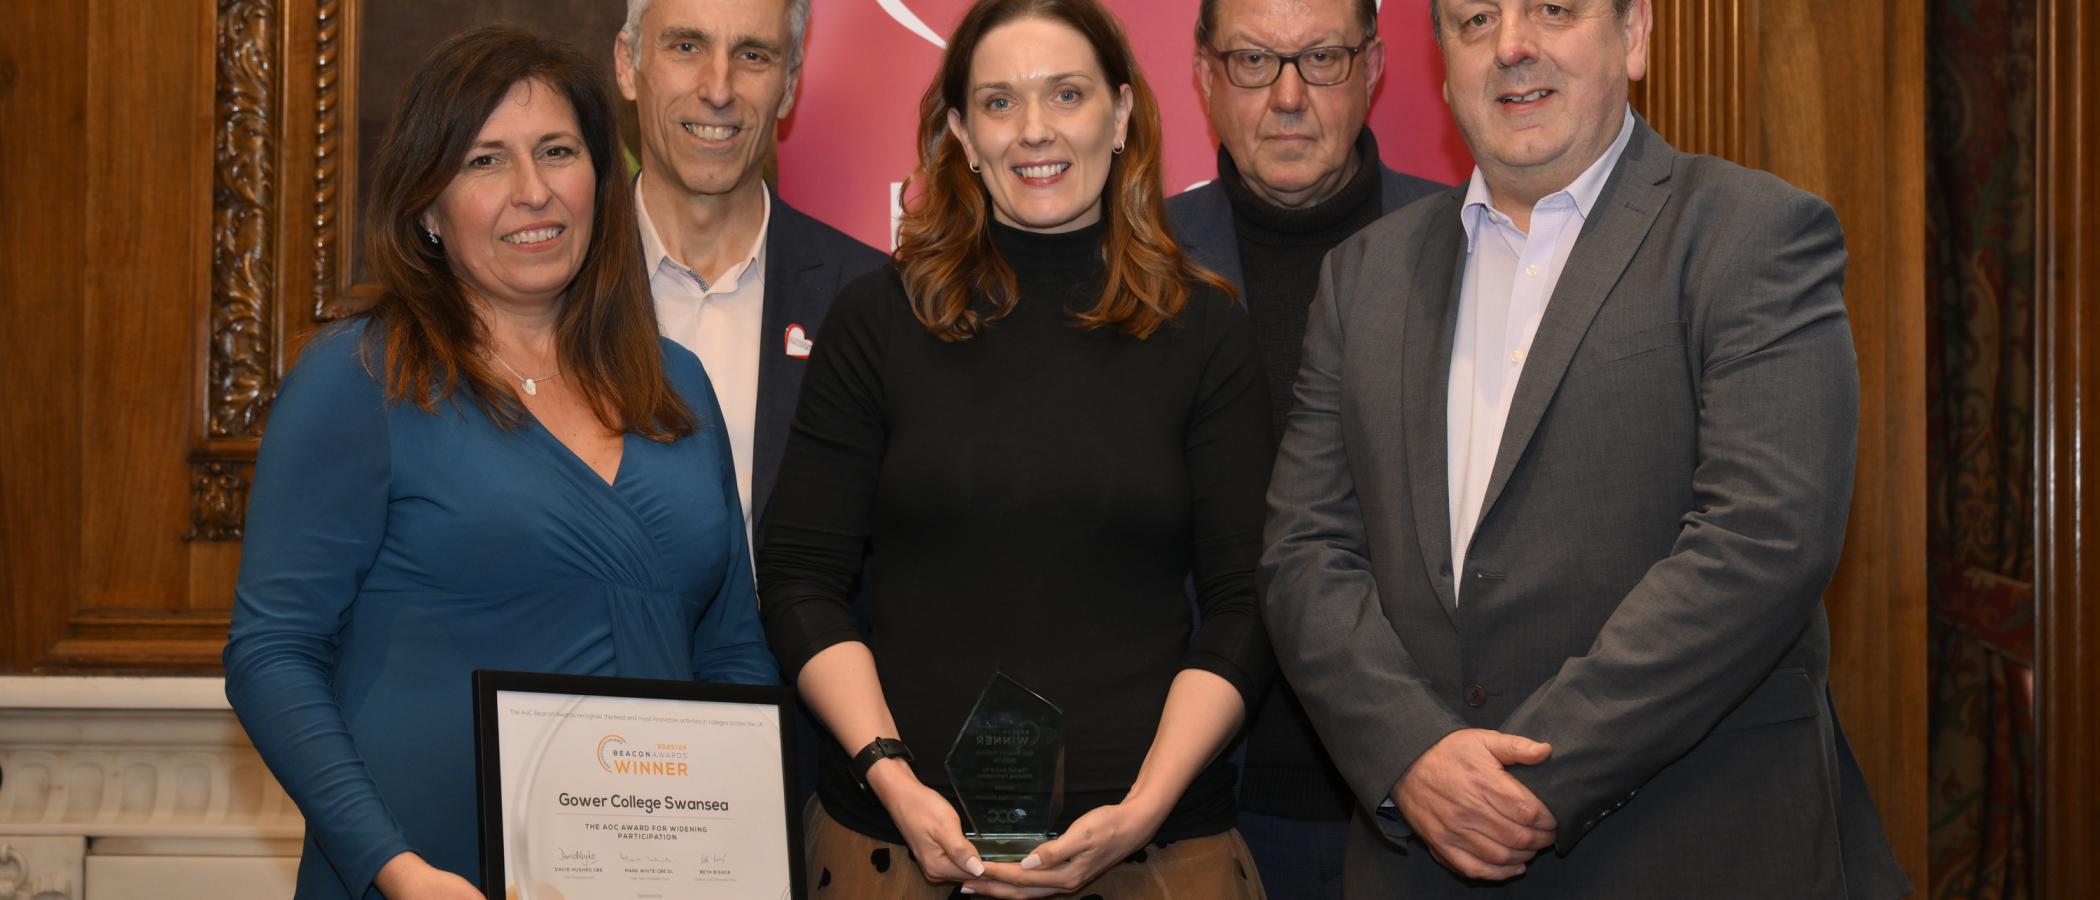 Director of Work-Based Learning Rachel Jones, Learner Support Emma Davies, and Chief Executive Officer Mark Jones are pictured with members of the Association of Colleges and the Beacon Award for Widening Participation. 